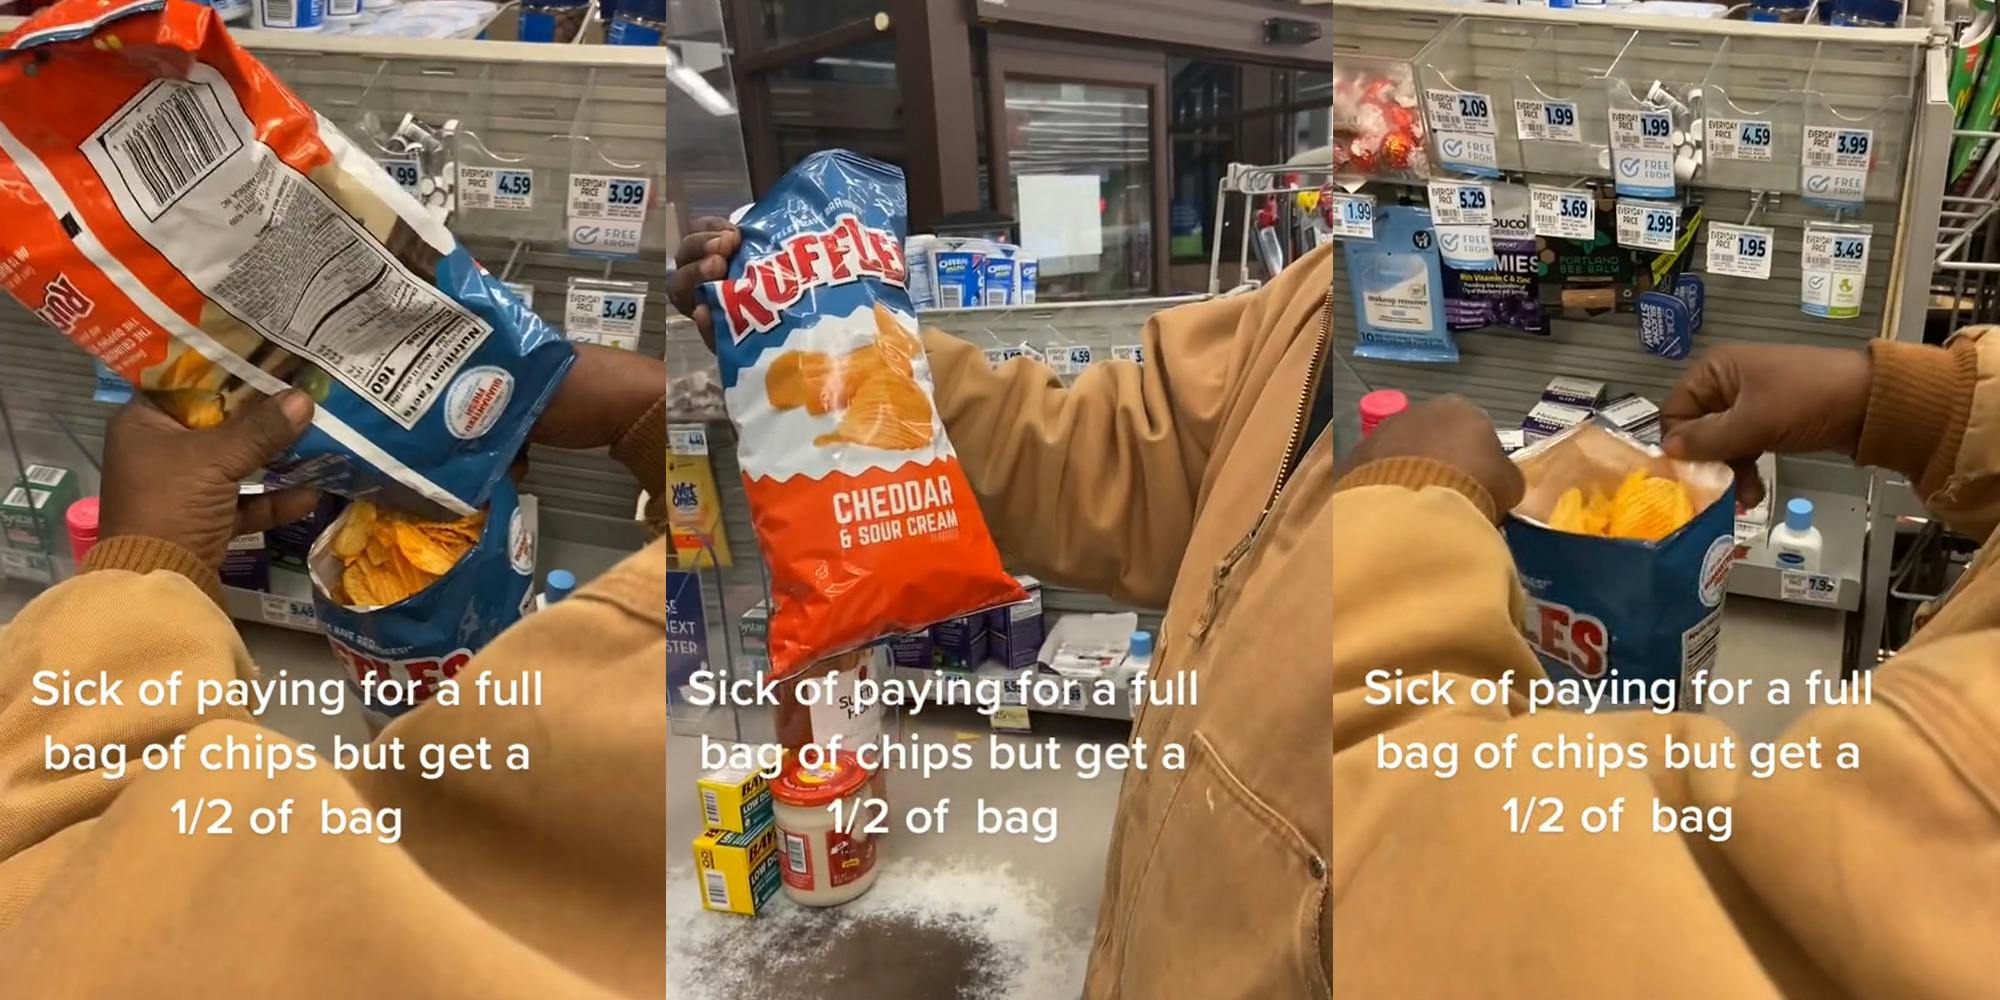 shopper pouring bag of Ruffles chips into another to make one full bag of chips caption "Sick of paying for a full bag of chips but get a 1/2 of bag" (l) shopper holding up self filled bag of chips caption "Sick of paying for a full bag of chips but get a 1/2 of bag" (c) man closing bag of chips at counter caption "Sick of paying for a full bag of chips but get a 1/2 of bag" (r)